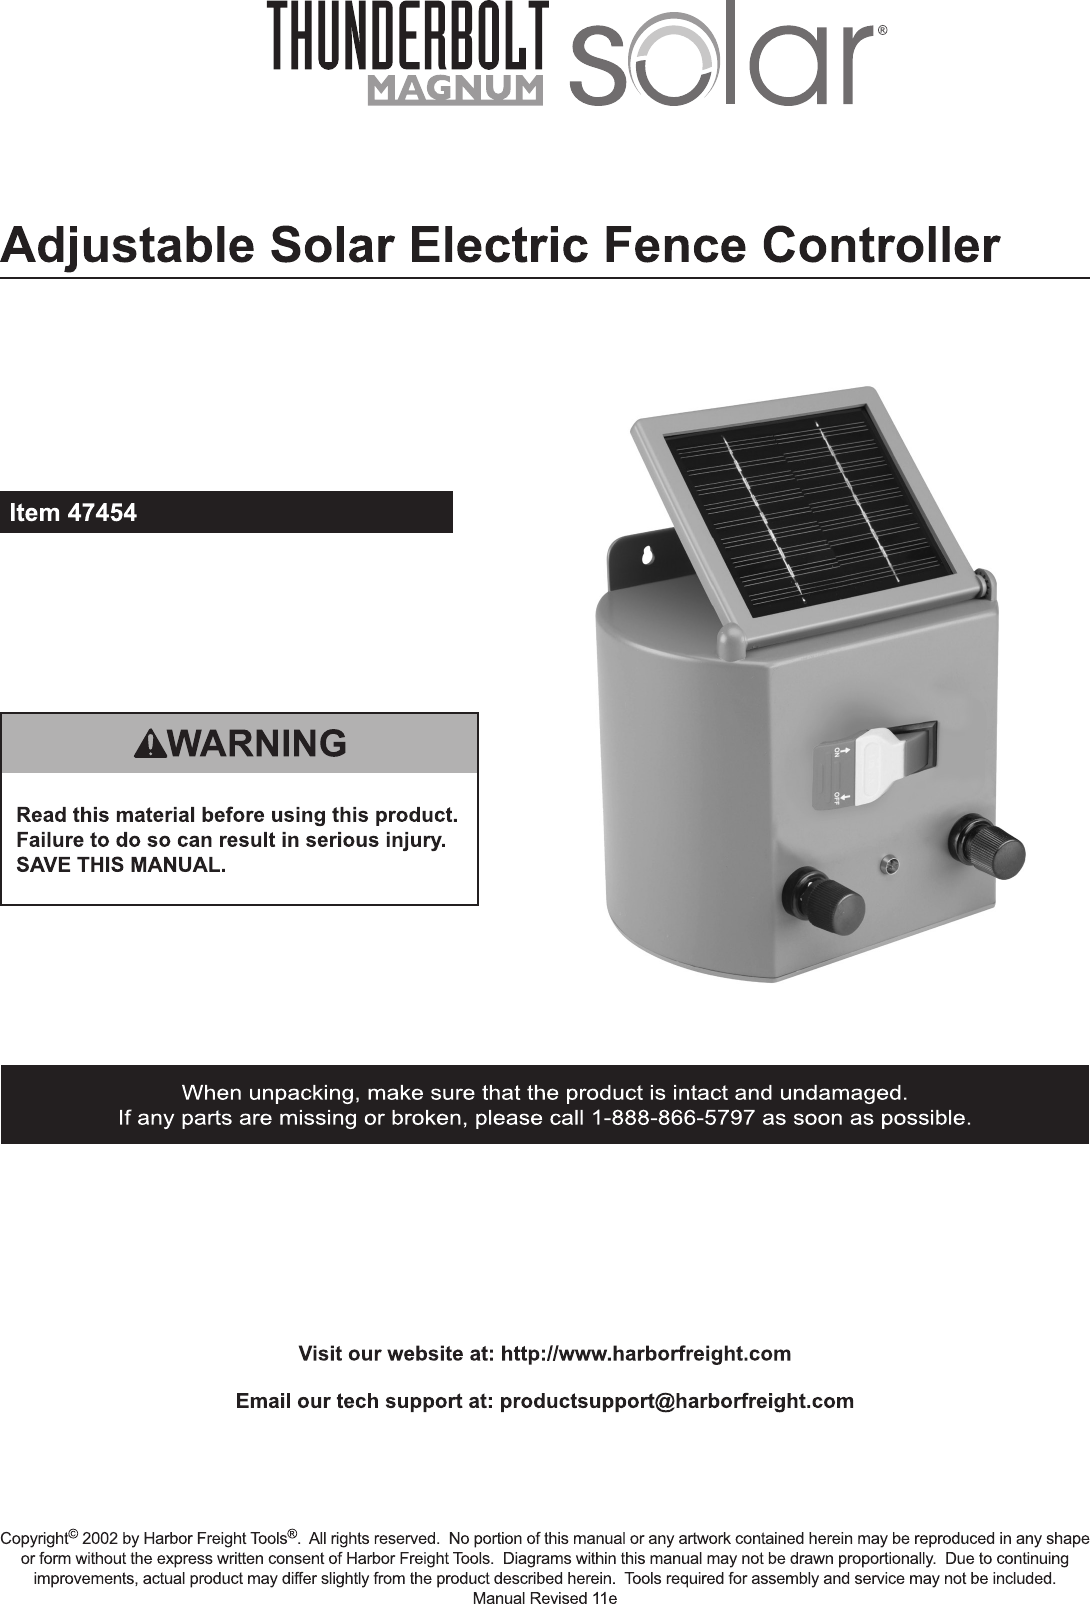 Page 1 of 8 - Harbor-Freight Harbor-Freight-Adjustable-Solar-Electric-Fence-Controller-Product-Manual-  Harbor-freight-adjustable-solar-electric-fence-controller-product-manual